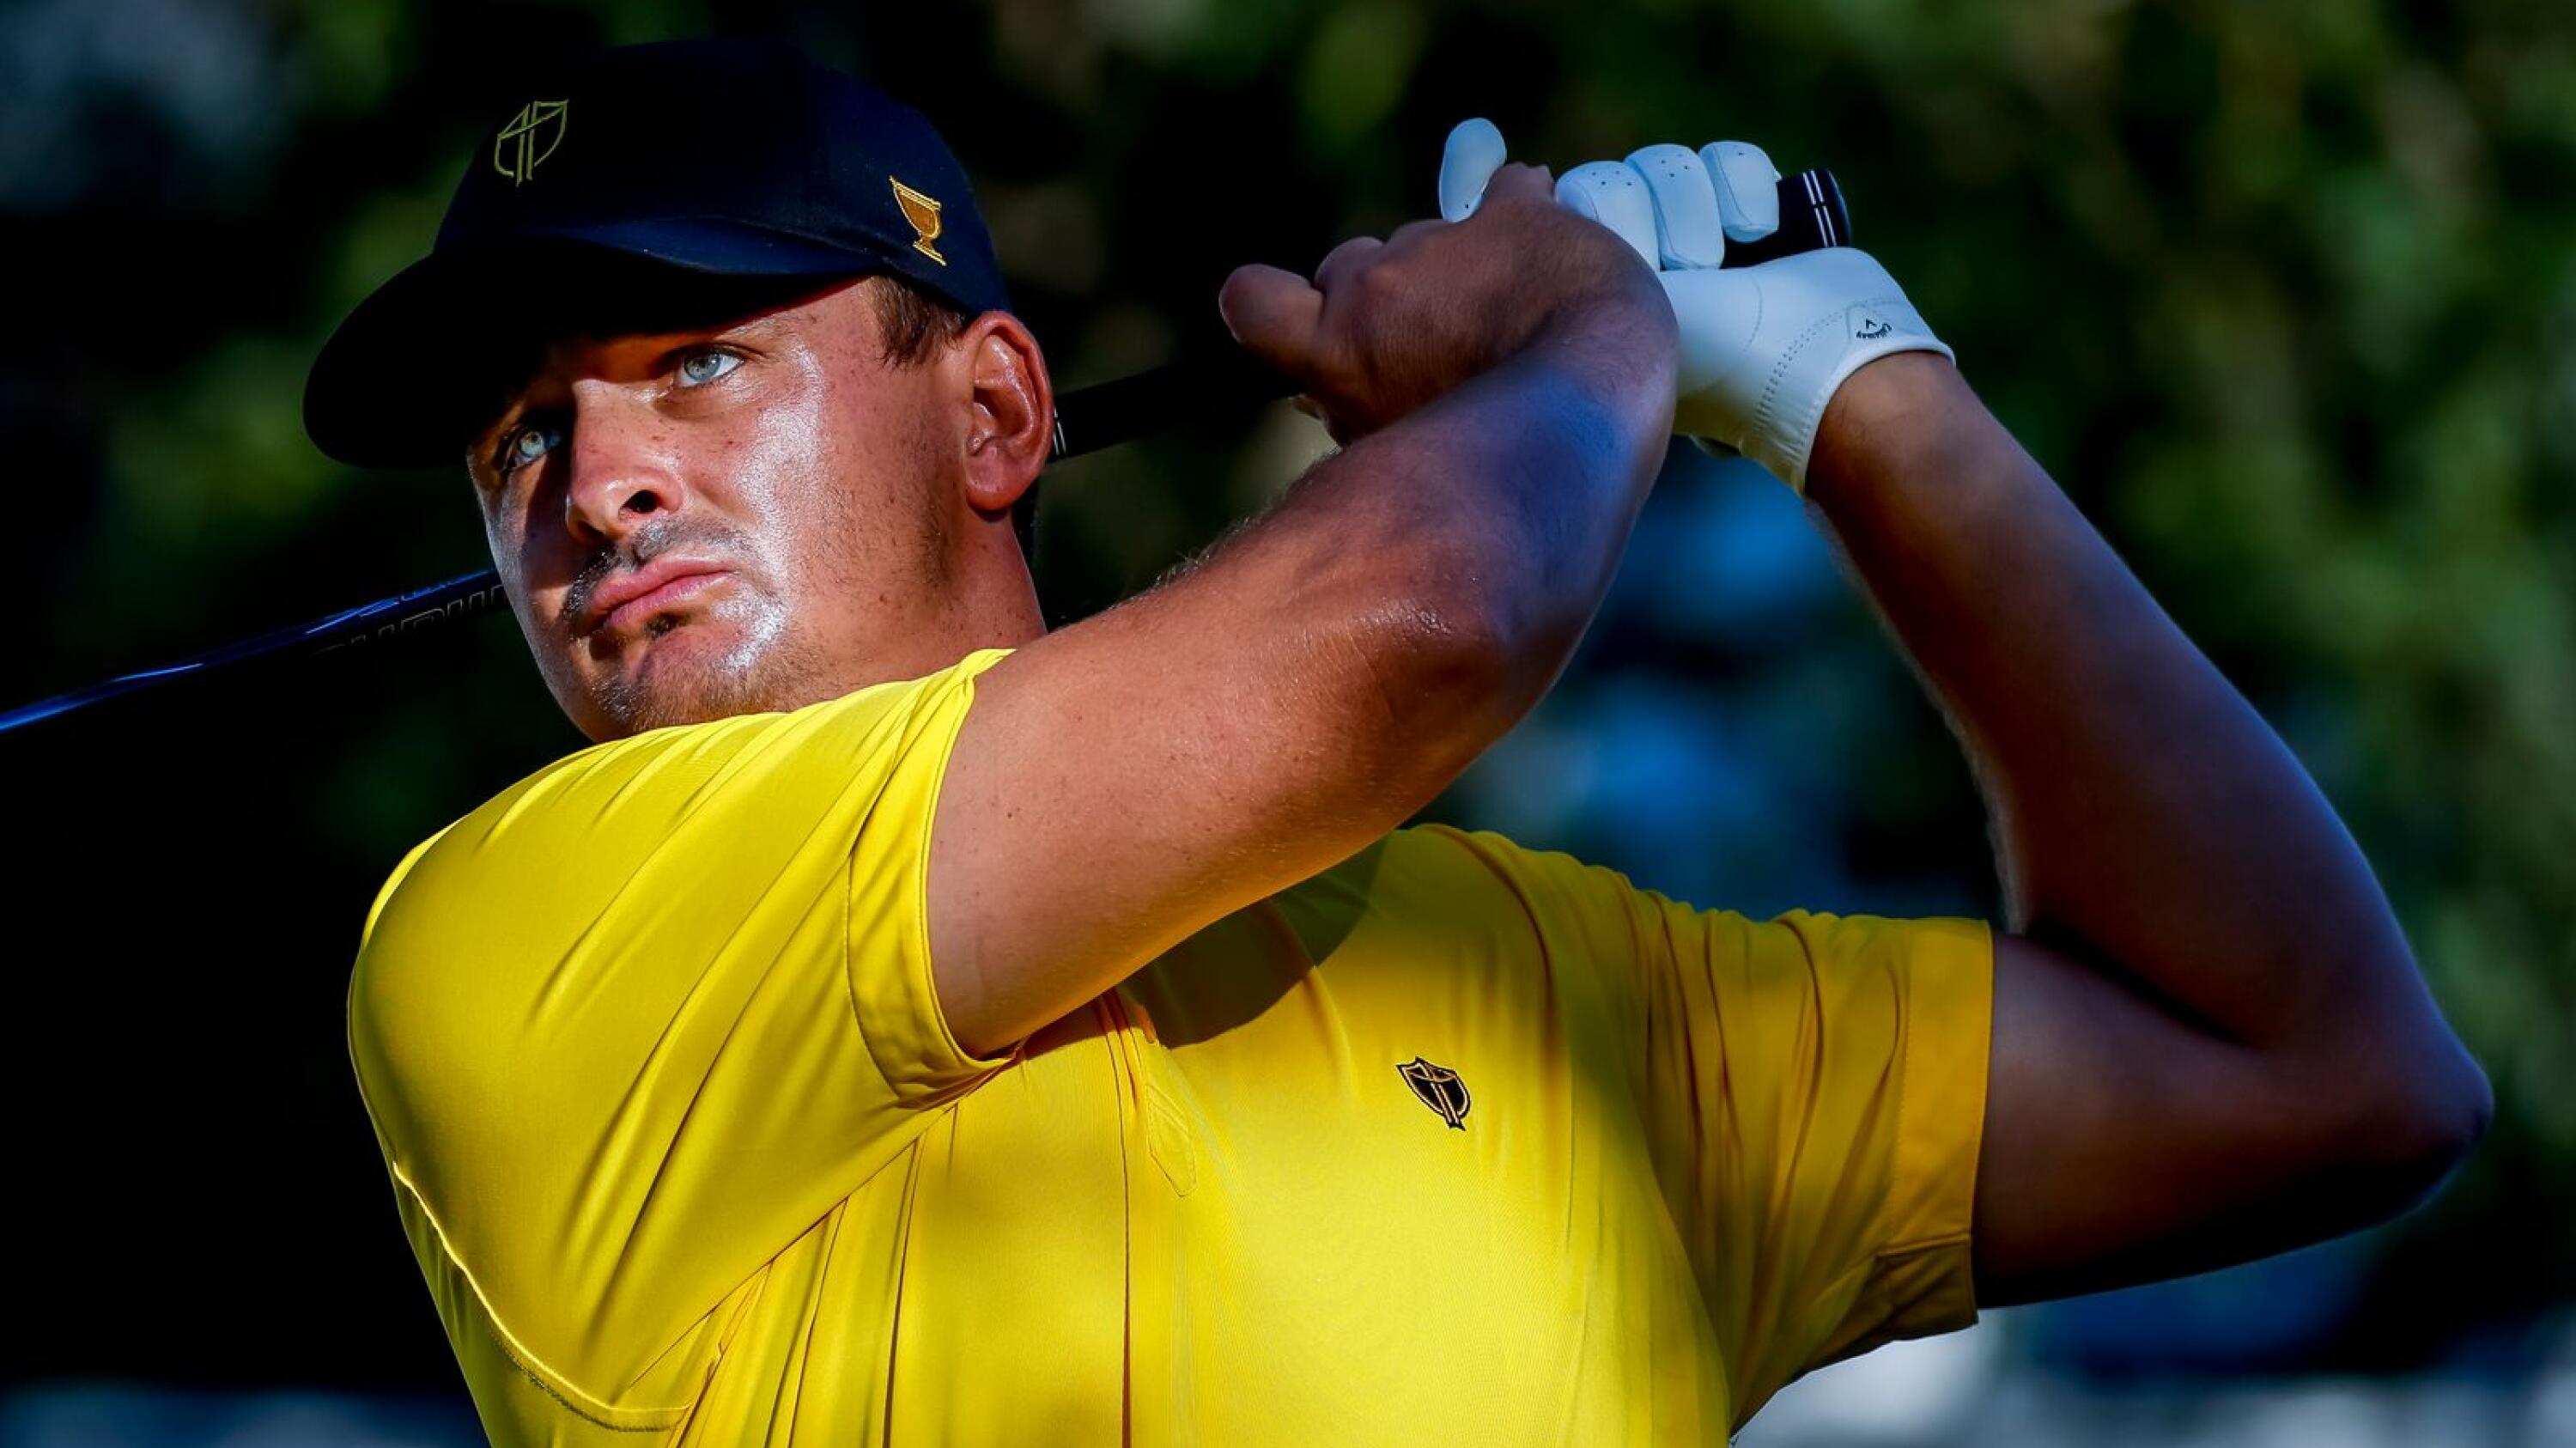 Photograph of golf player Christiaan Bezuidenhout, of South Africa, in a yellow shirt, swinging a golf club during the final practice round for the 2022 Presidents Cup golf tournament at the Quail Hollow Club in Charlotte, North Carolina, in the US.